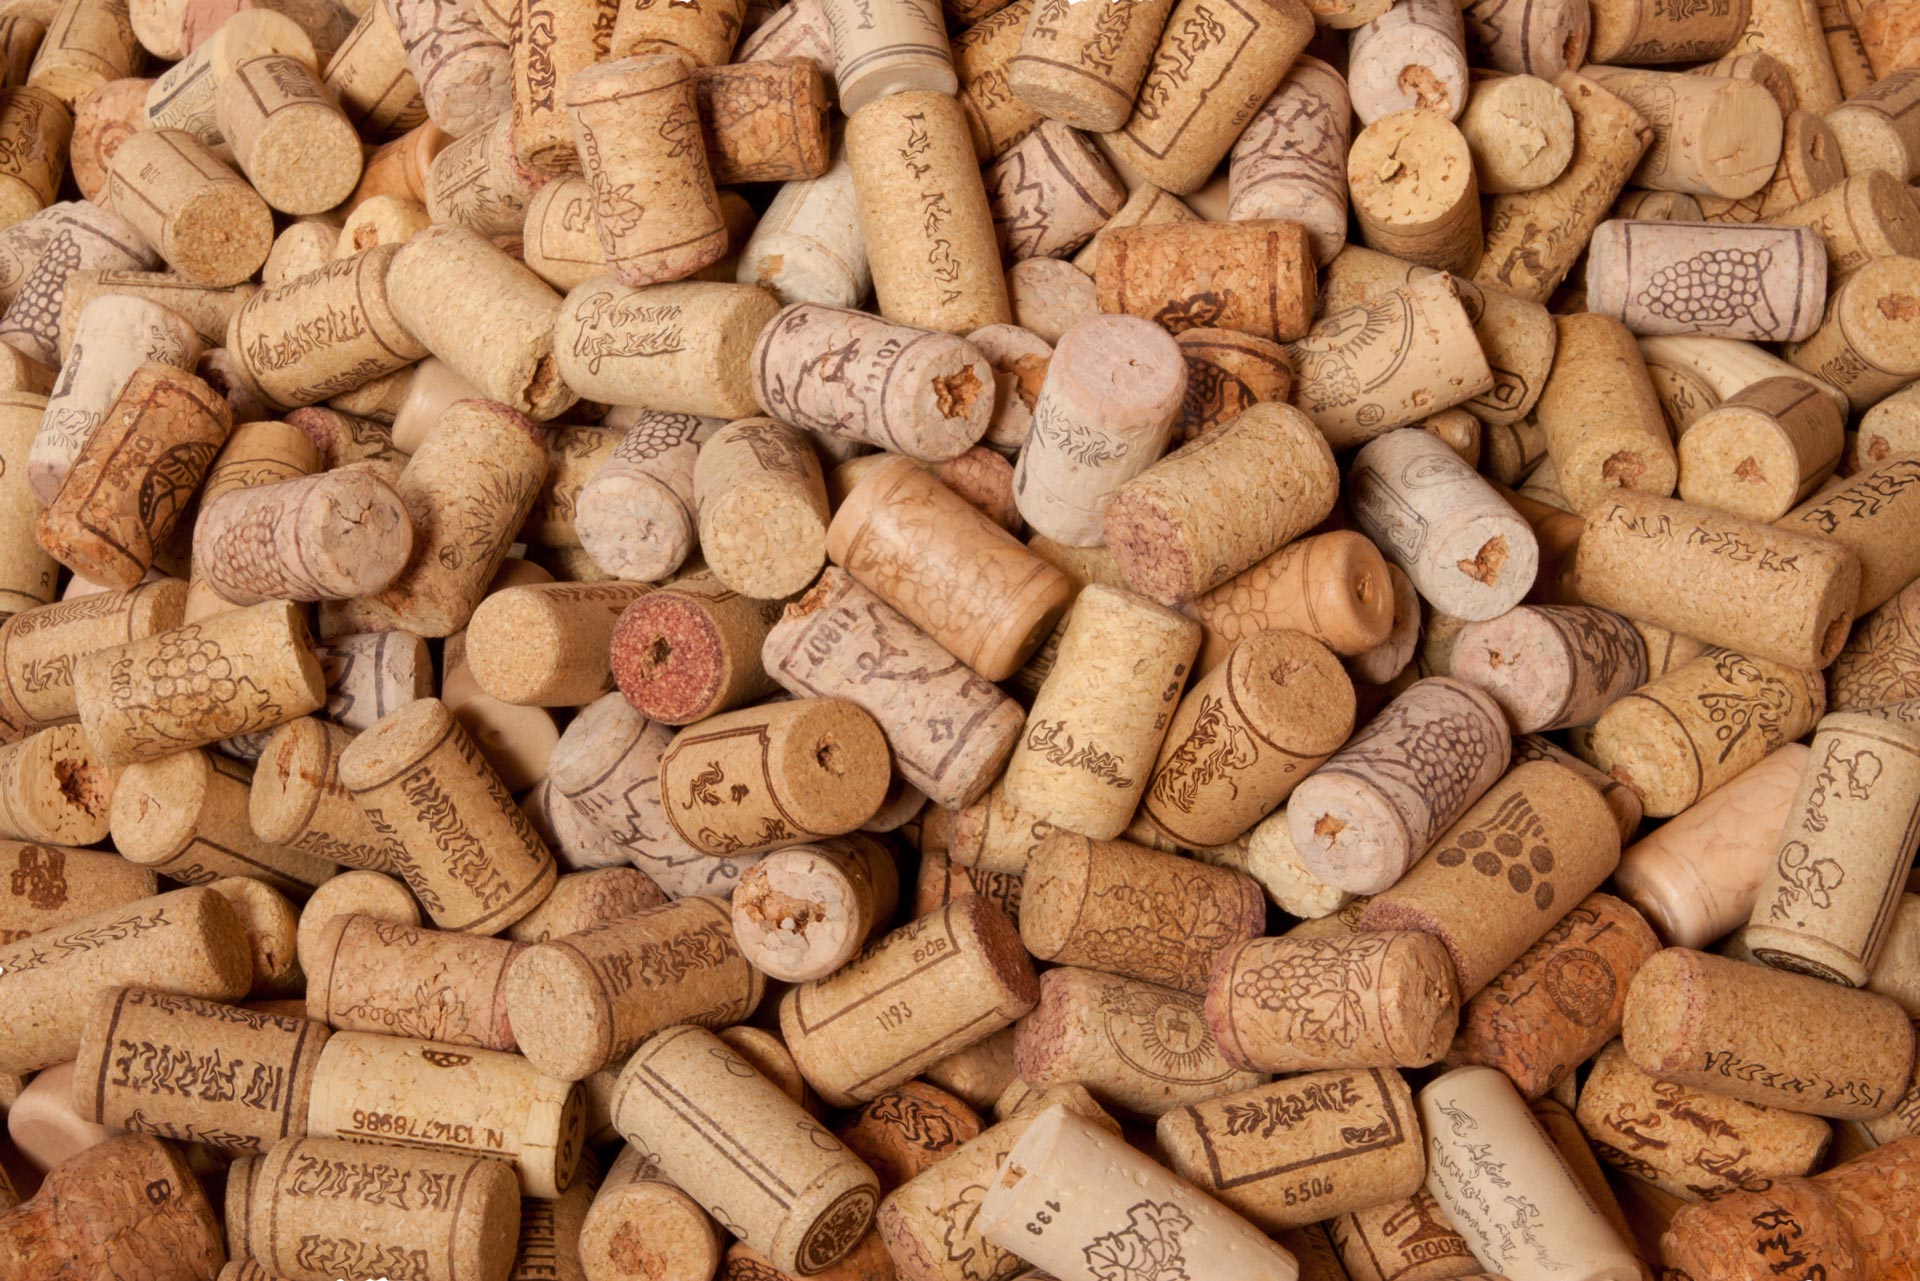 Cork: Nature's Most Sustainable Material